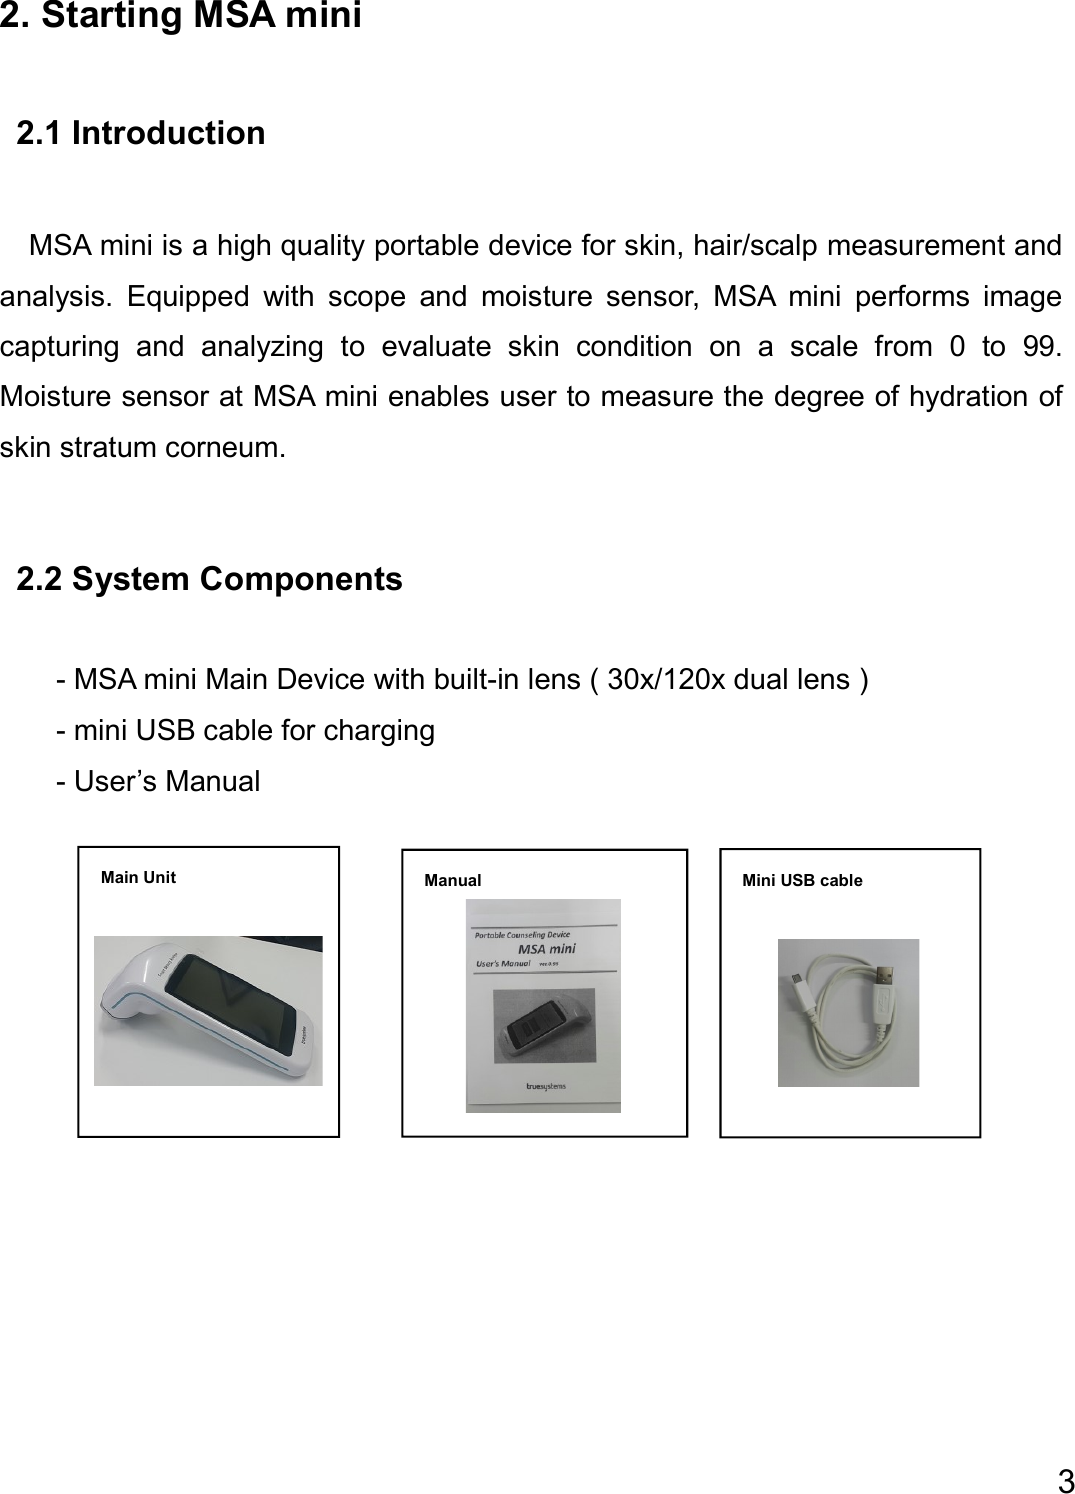  3     Main Unit  Manual  Mini USB cable  2. Starting MSA mini  2.1 Introduction    MSA mini is a high quality portable device for skin, hair/scalp measurement and analysis.  Equipped  with  scope  and  moisture  sensor,  MSA  mini  performs  image capturing  and  analyzing  to  evaluate  skin  condition  on  a  scale  from  0  to  99. Moisture sensor at MSA mini enables user to measure the degree of hydration of skin stratum corneum.  2.2 System Components  - MSA mini Main Device with built-in lens ( 30x/120x dual lens ) - mini USB cable for charging   - User’s Manual                